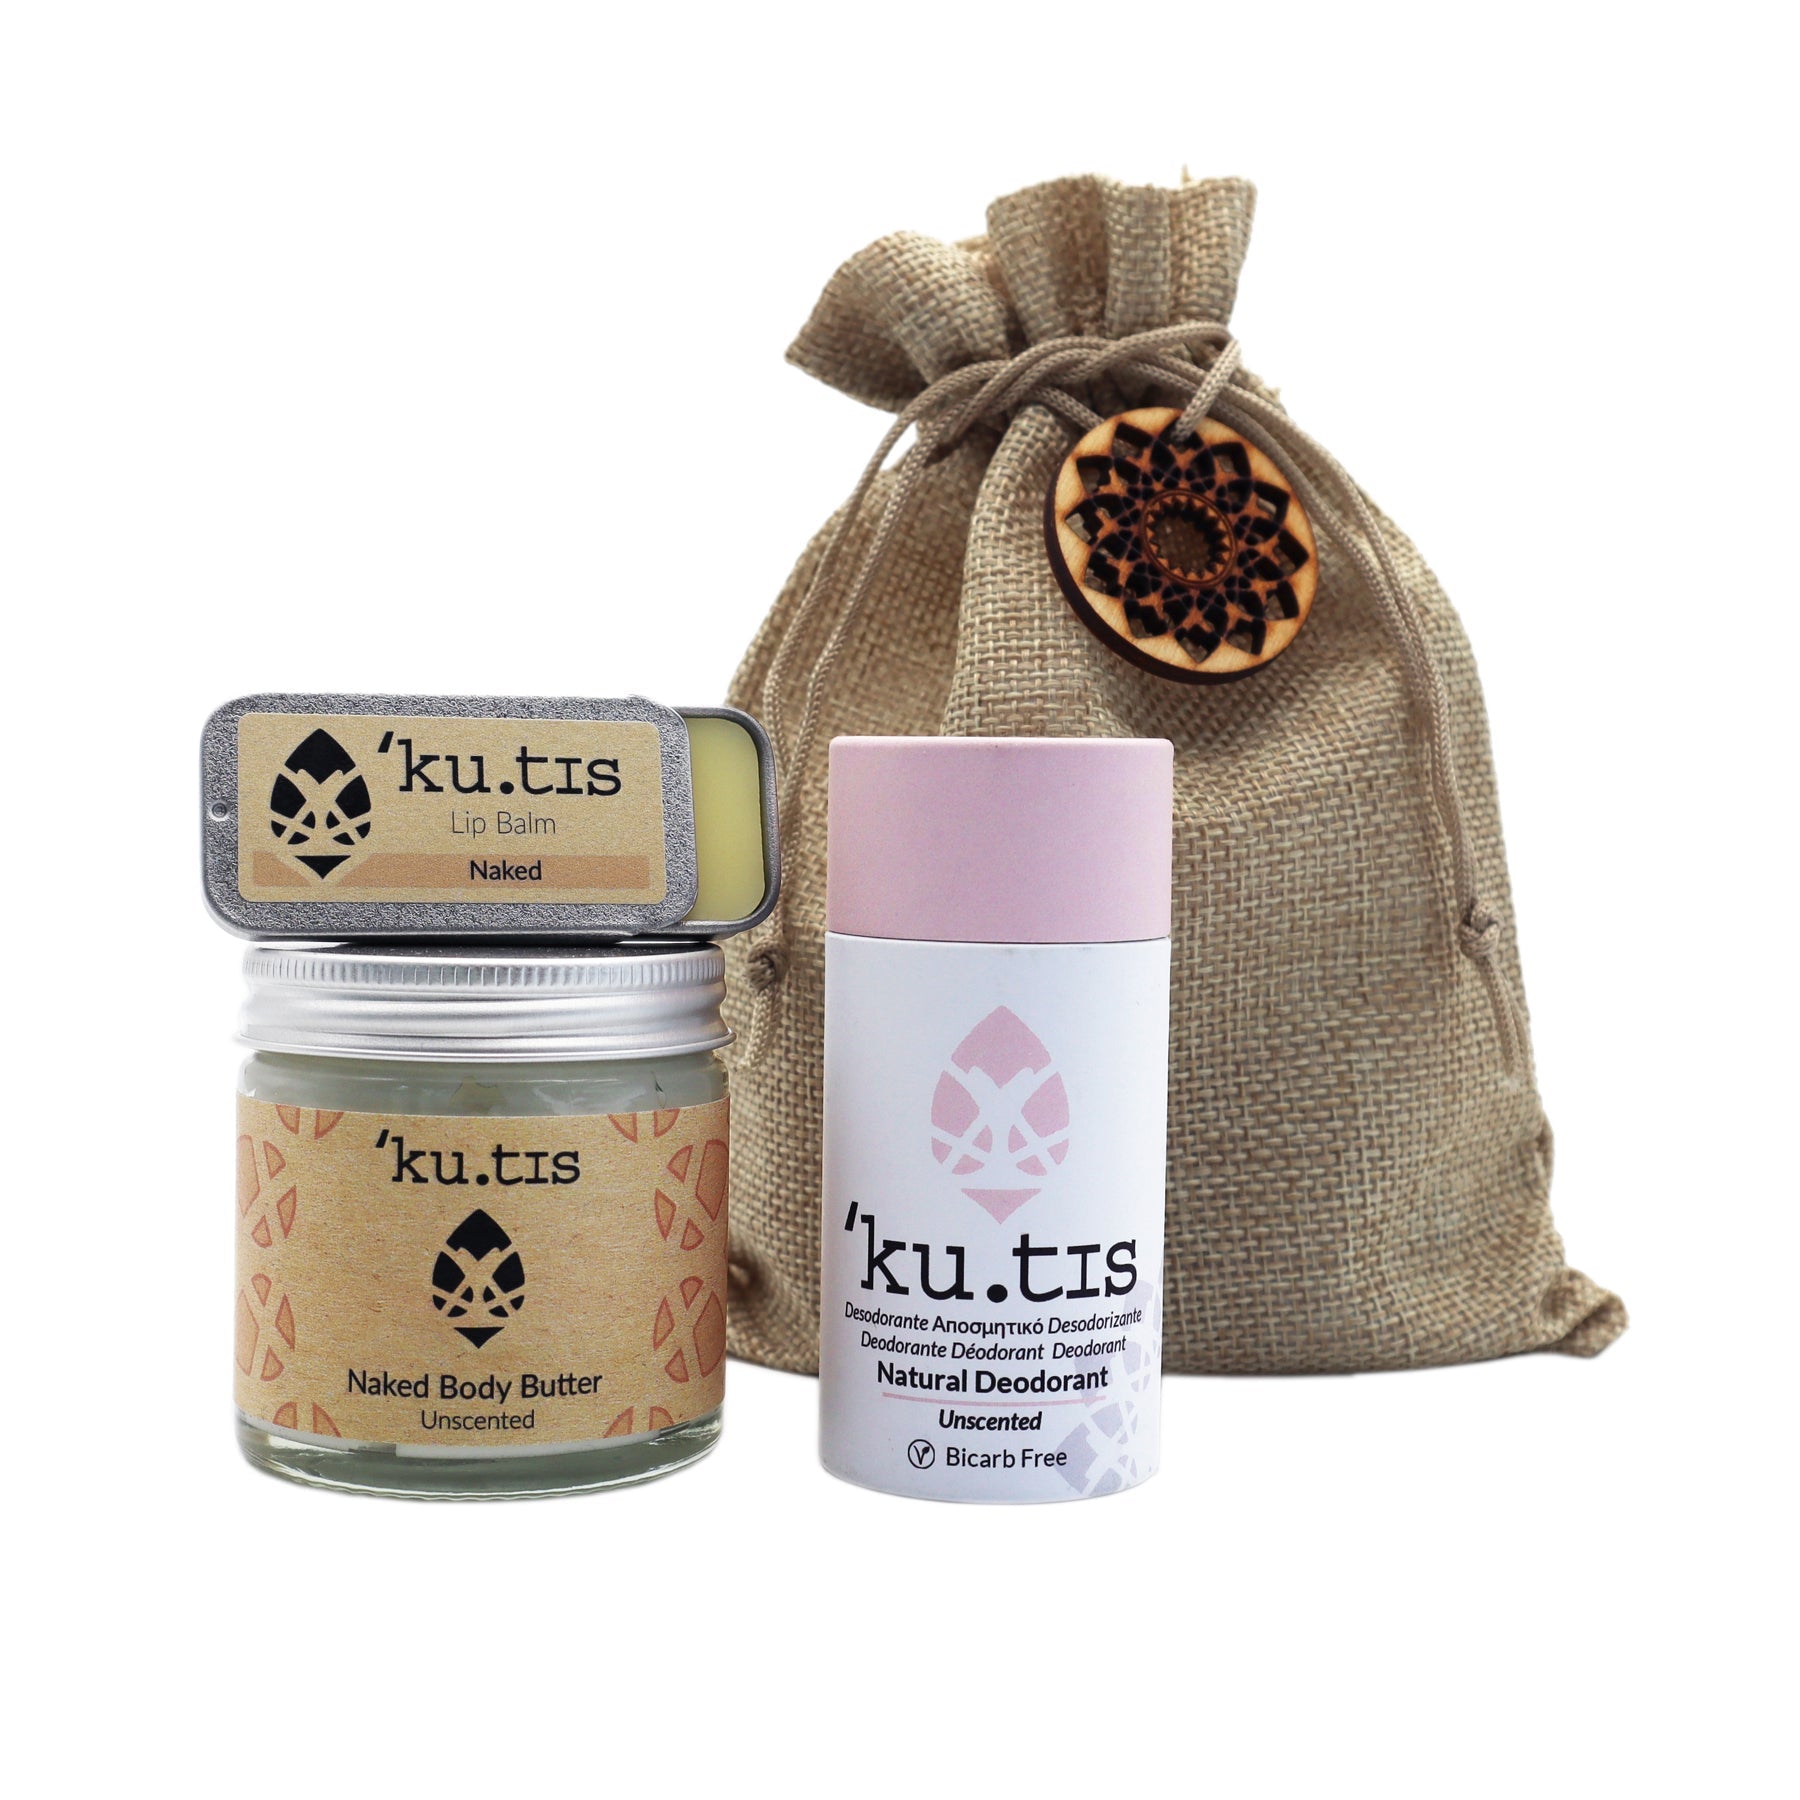 Hessian drawstring gift pouch containing lip balm, body butter and dedorant